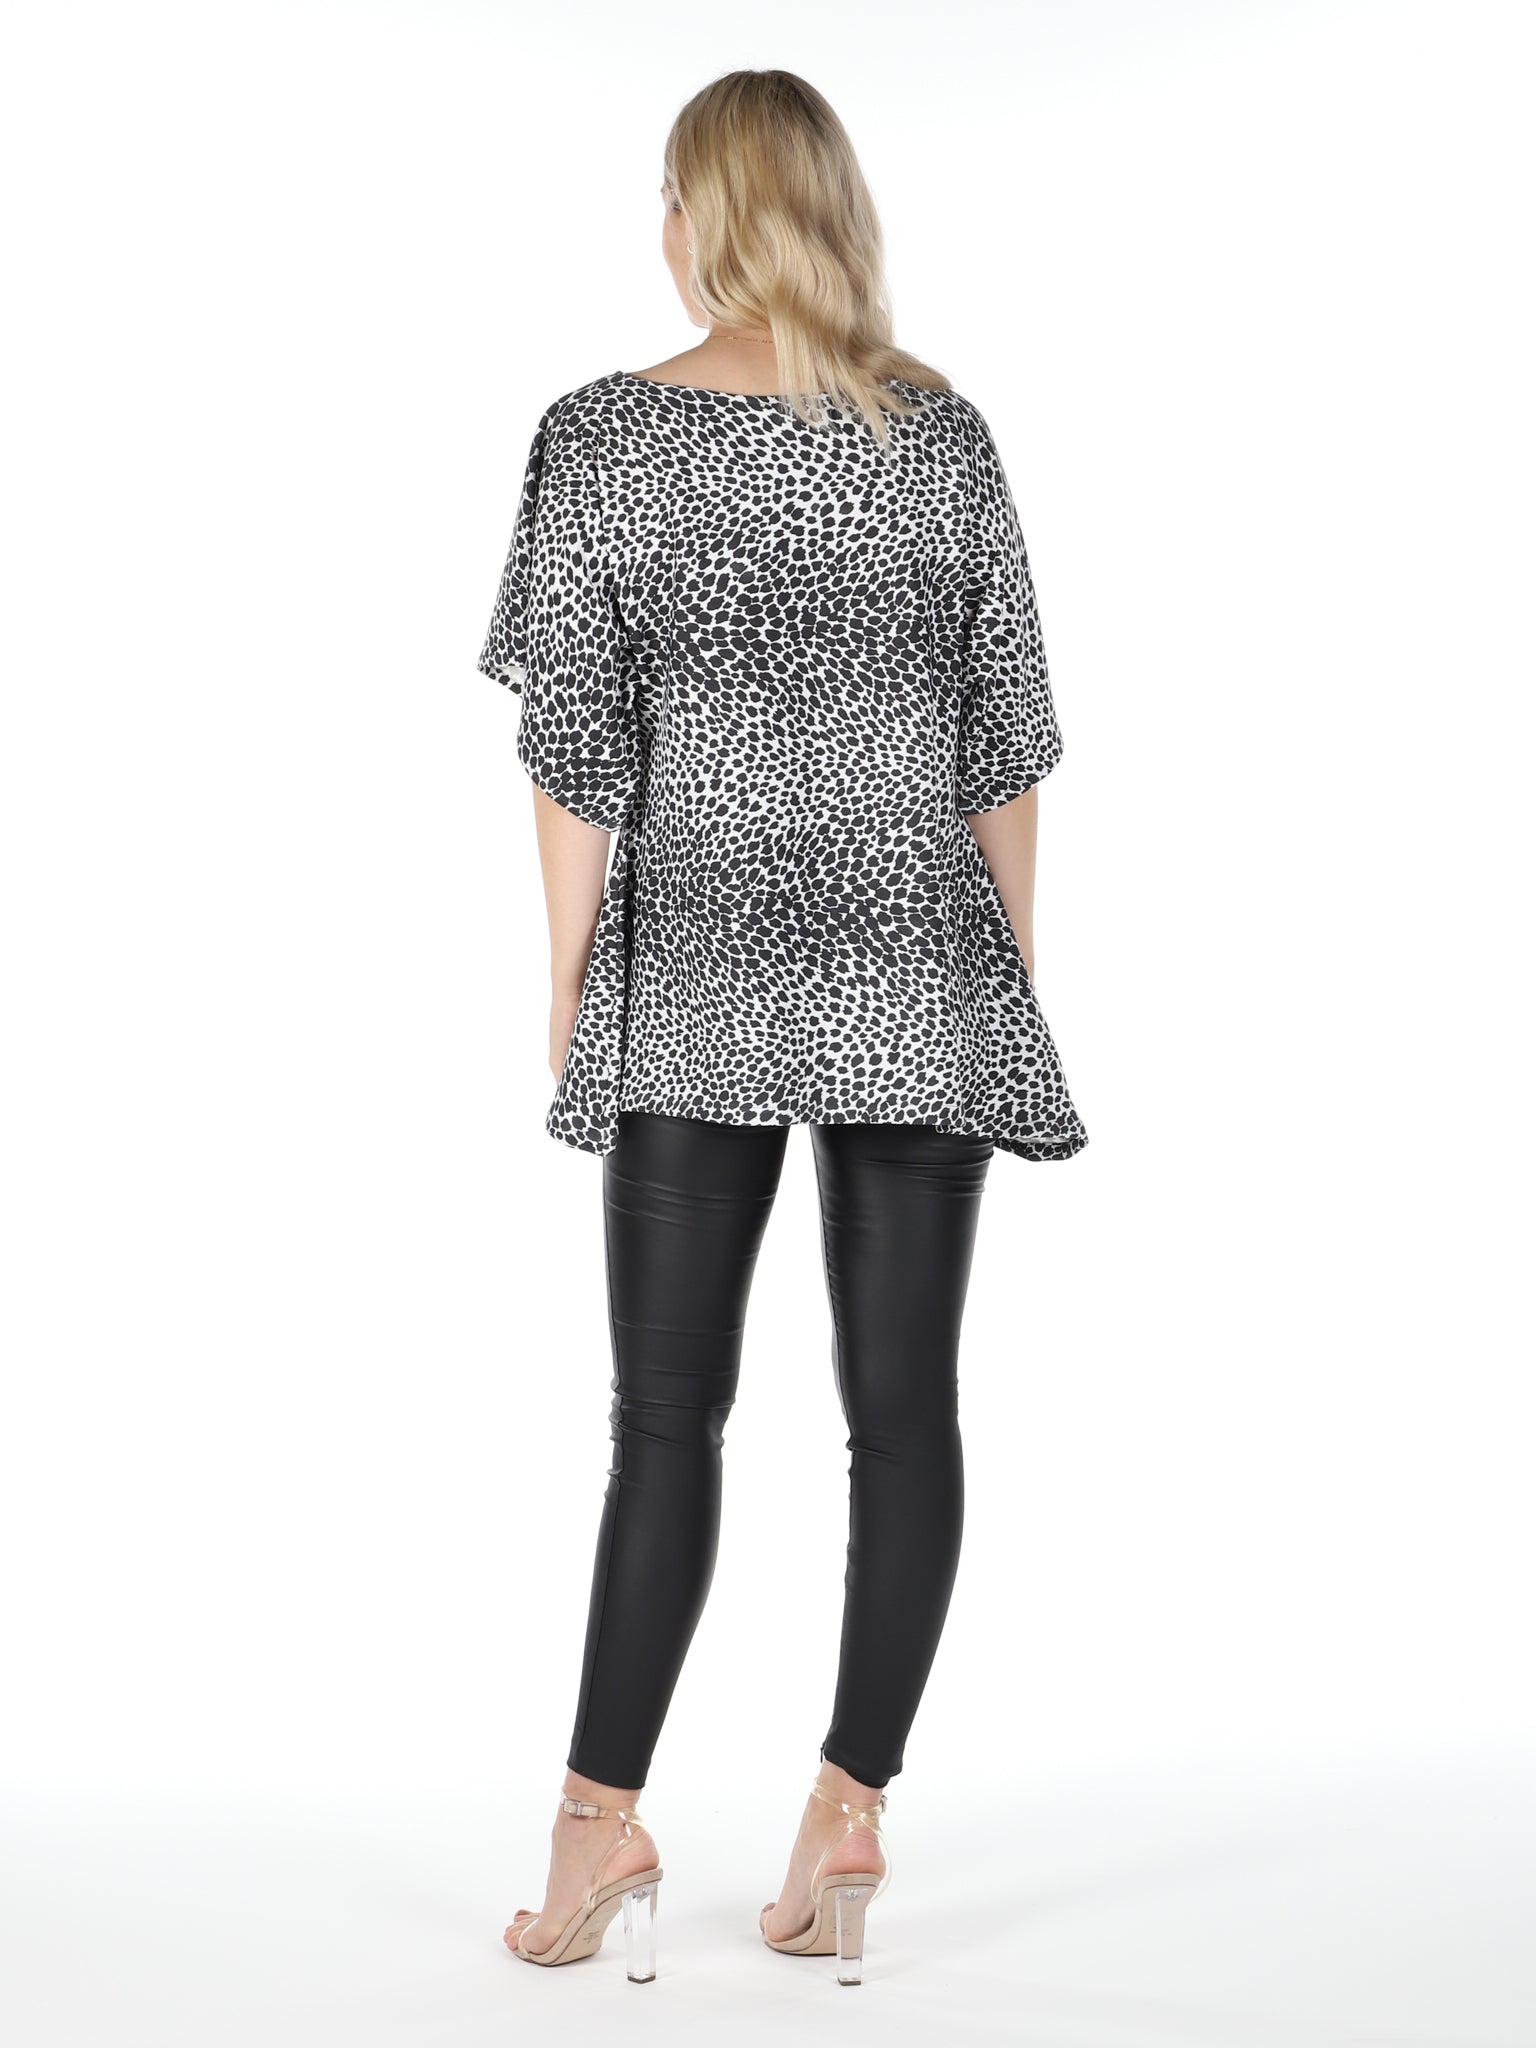 Black and White Leopard Print Atlas Top